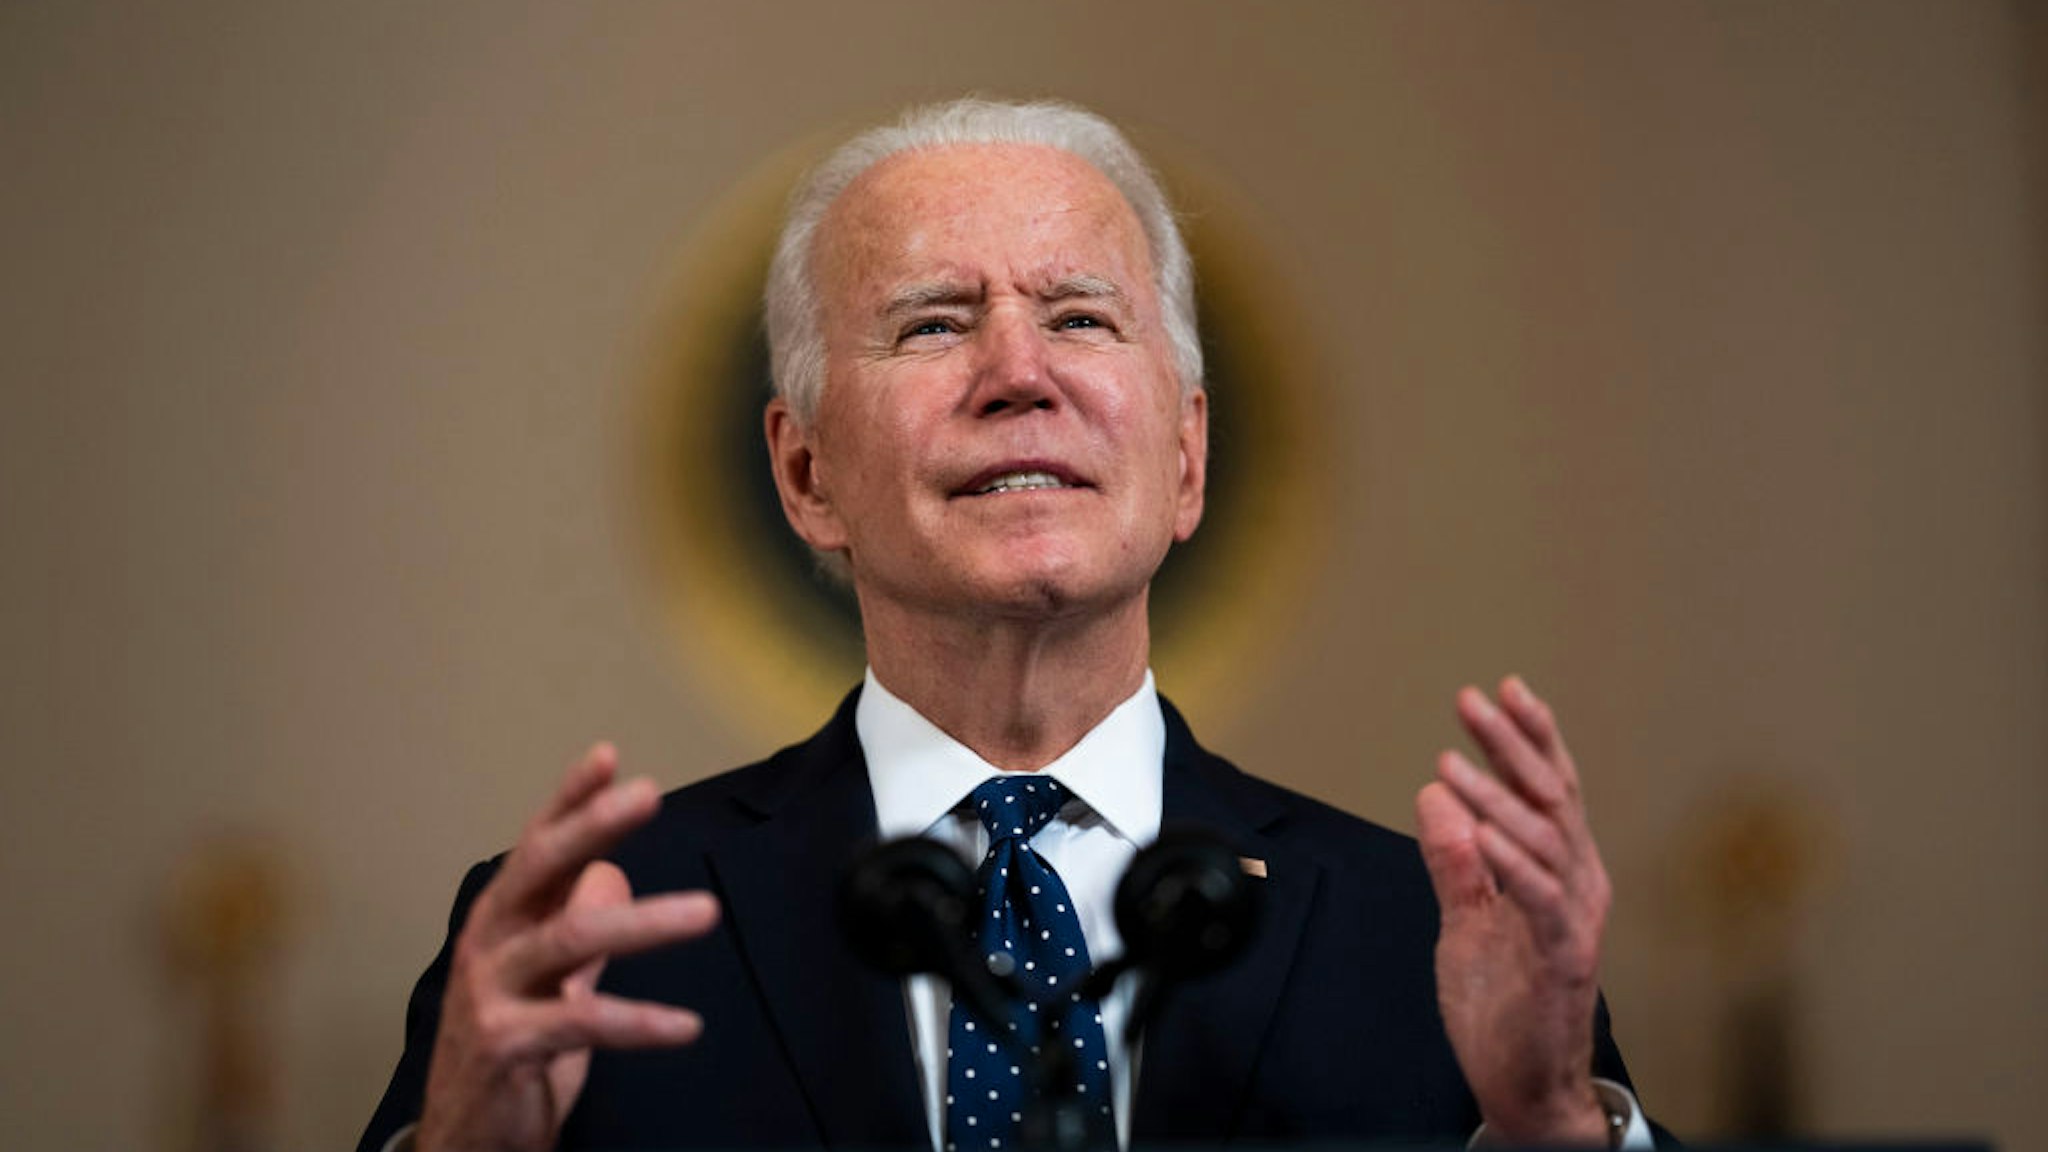 WASHINGTON, DC - APRIL 20: U.S. President Joe Biden makes remarks in response to the verdict in the murder trial of former Minneapolis police officer Derek Chauvin at the Cross Hall of the White House April 20, 2021 in Washington, DC. Chauvin was found guilty by the jury today on all three charges in the death of George Floyd last May. (Photo by Doug Mills/Pool/Getty Images)